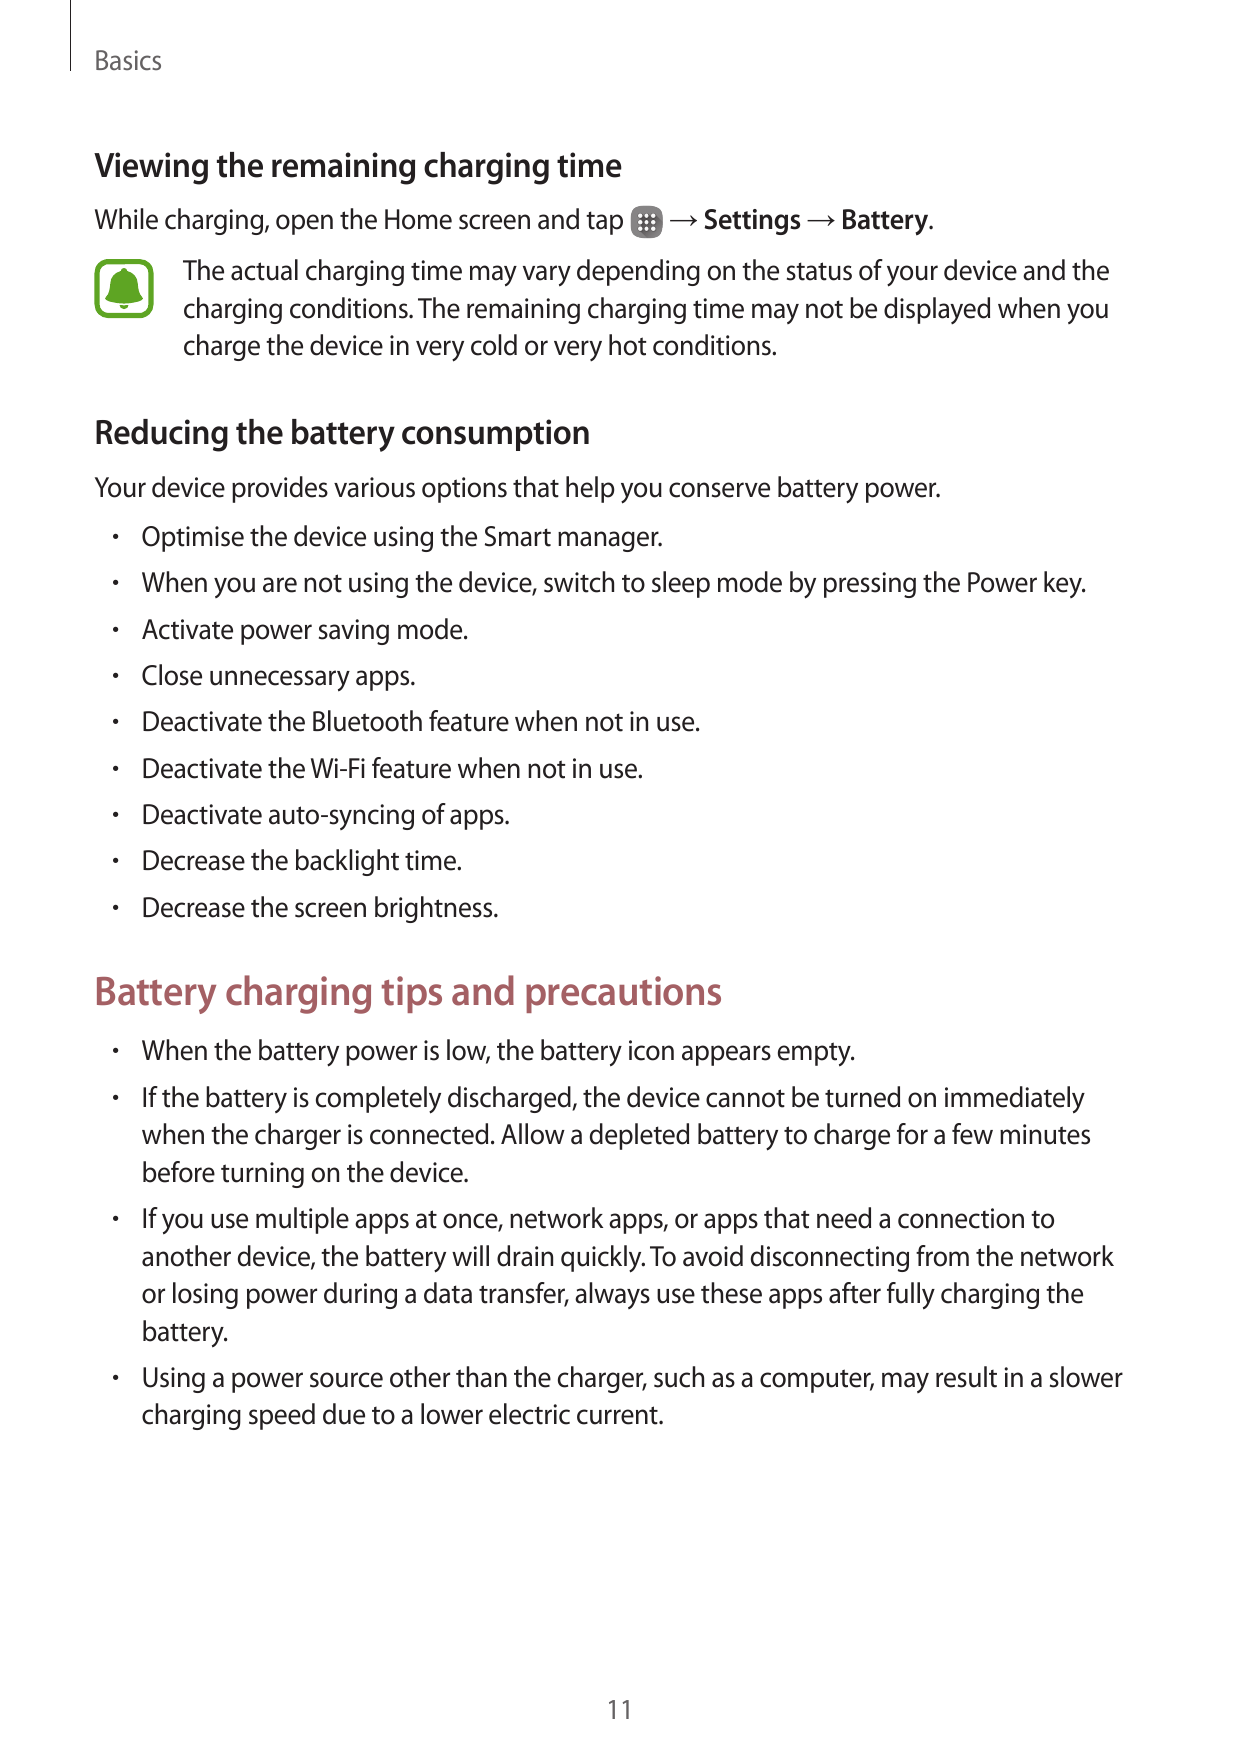 BasicsViewing the remaining charging timeWhile charging, open the Home screen and tap→ Settings → Battery.The actual charging ti